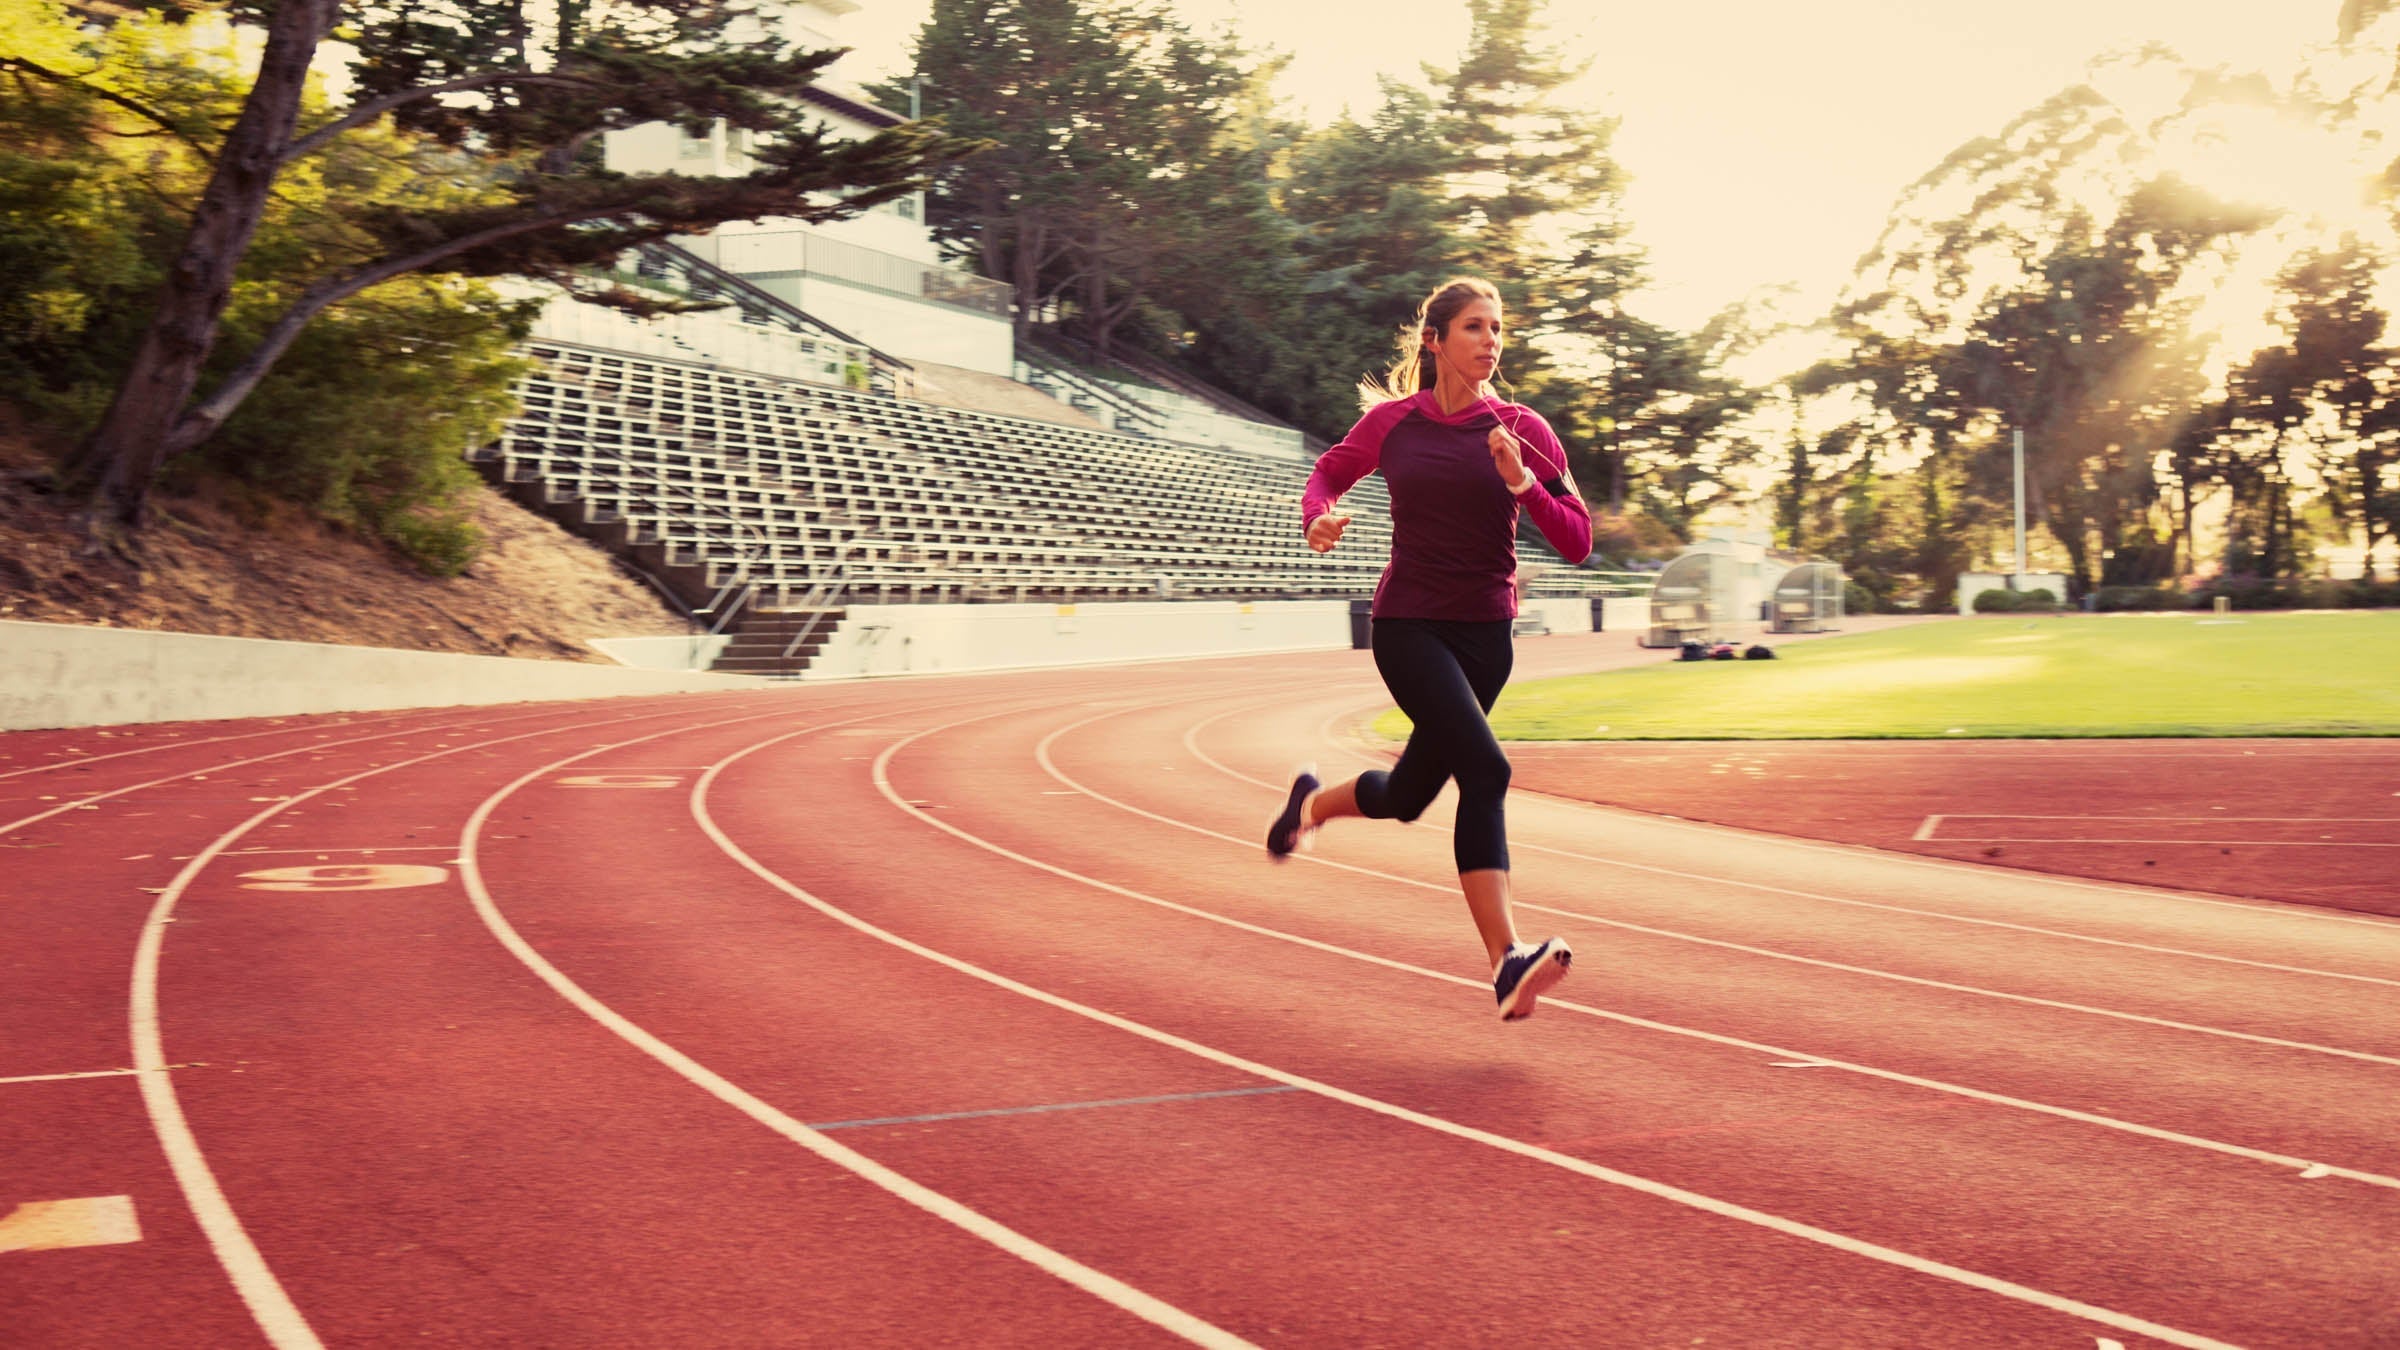 4 Workouts That Will Make You A Faster Runner  Track workout, Track workout  training, Speed workout